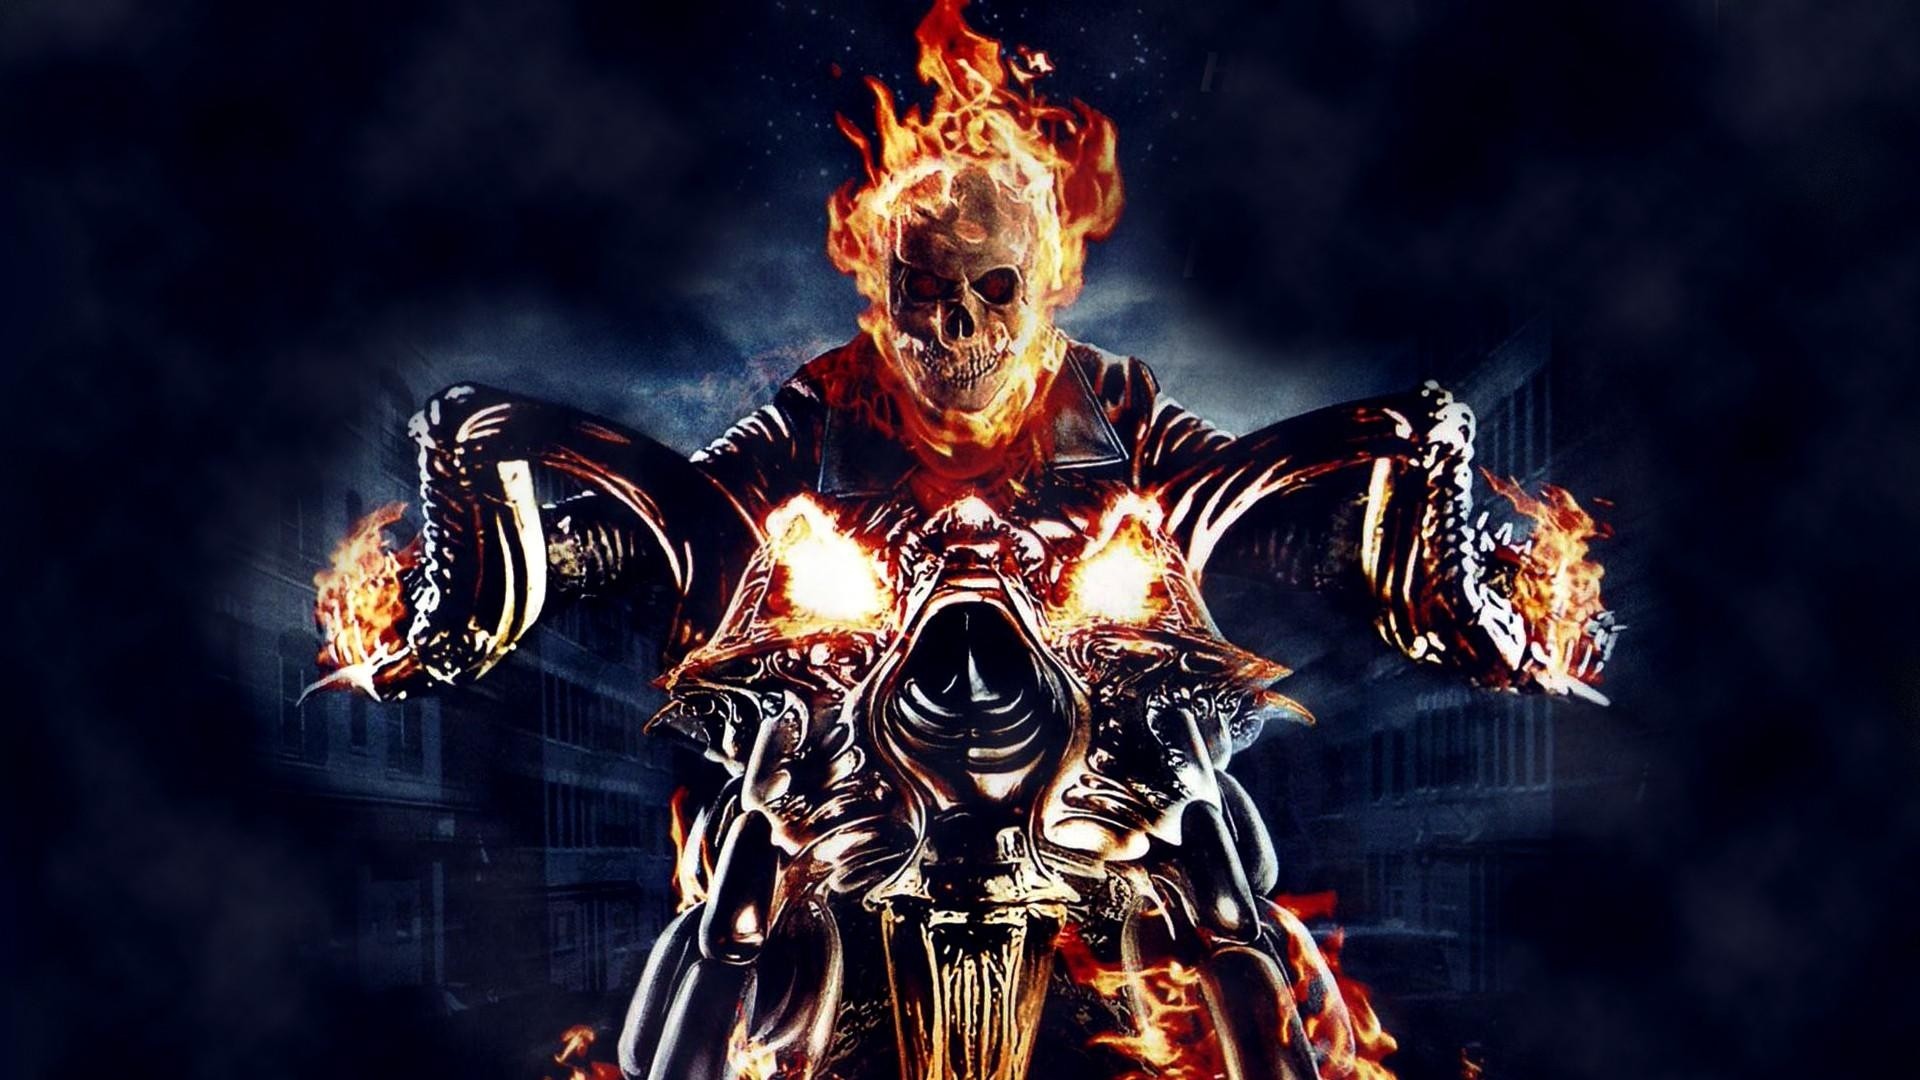 Ghost Rider Skull Fire Motorcycle Comics Graphic Novels 1920x1080